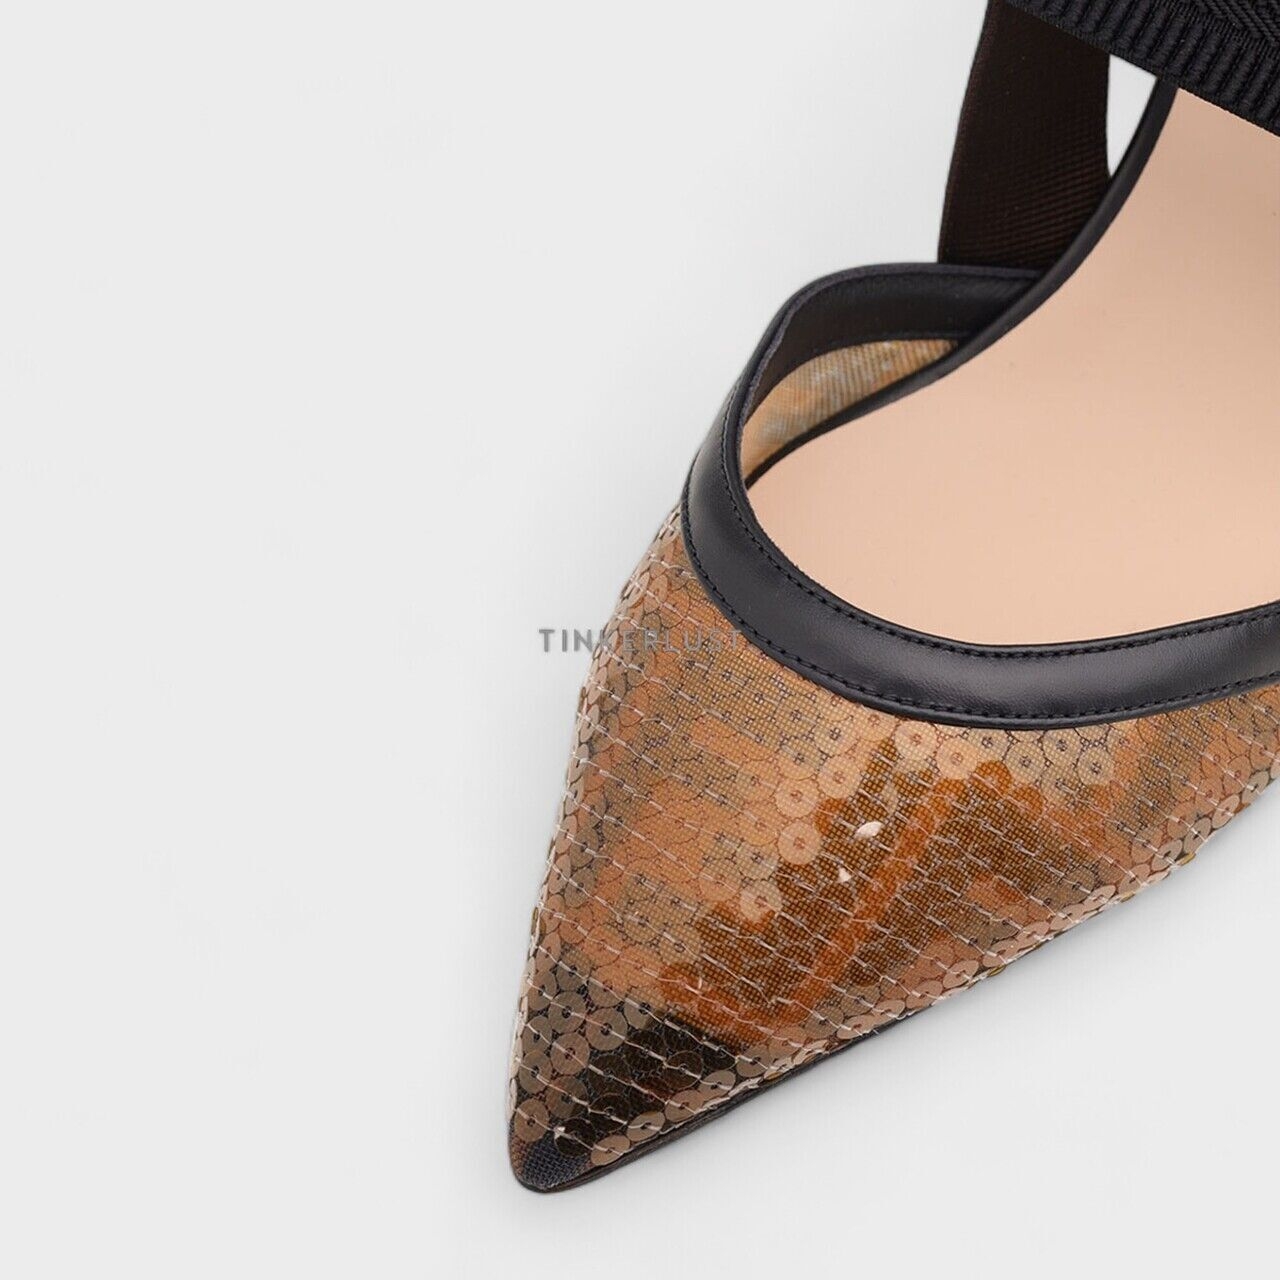 Fendi Colibri Slingback Pumps 55mm in Black/Amber Micromesh FF Motif with Sequin Embroidery Heels